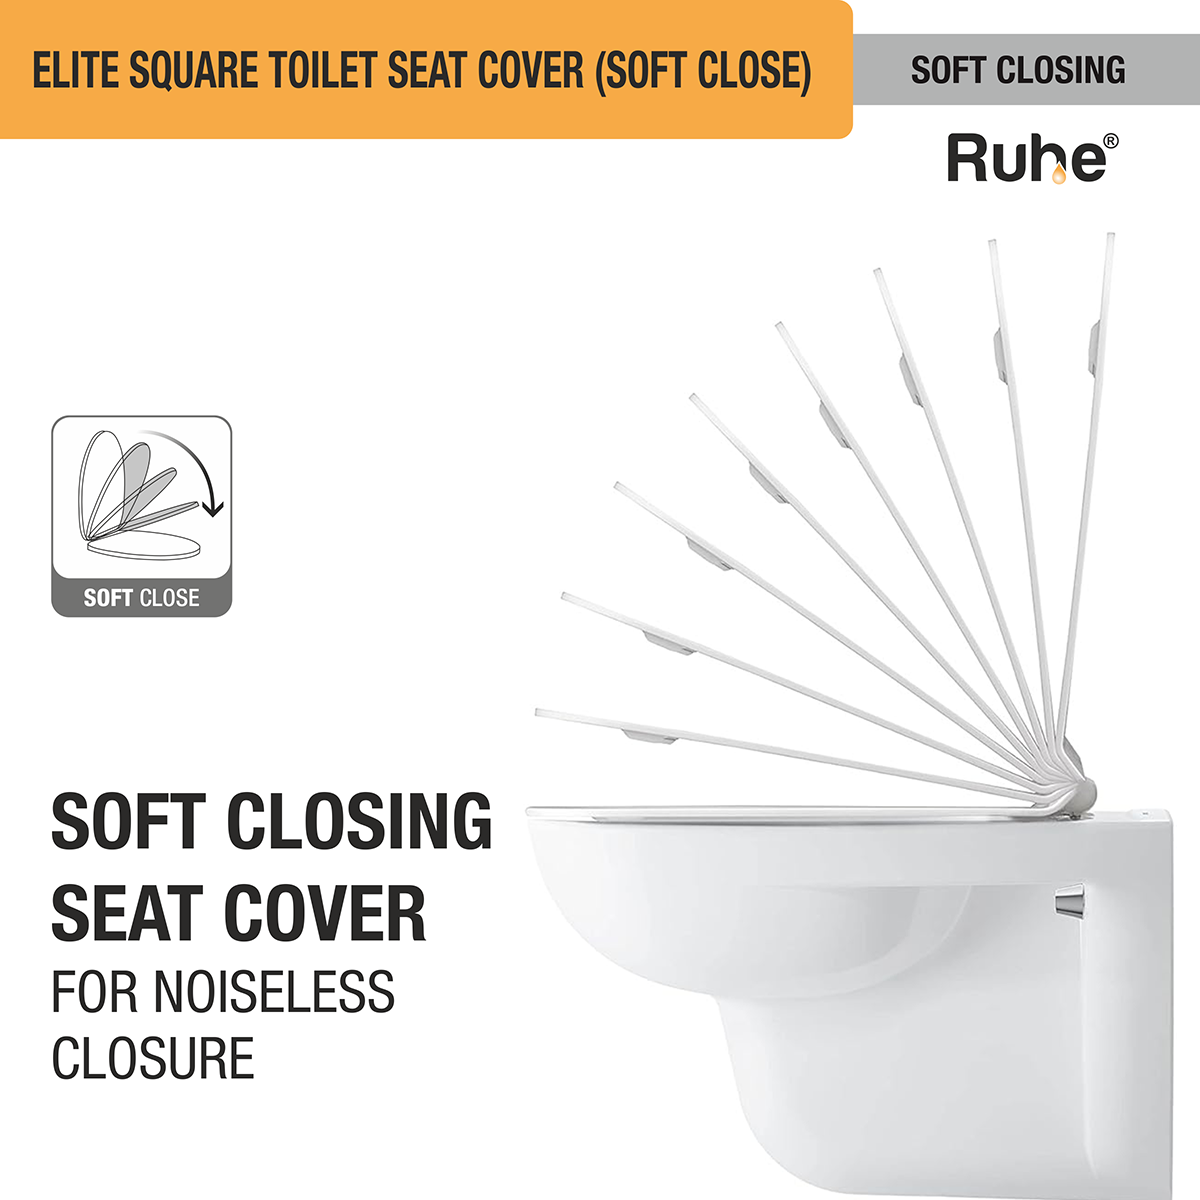 Elite Square Toilet Seat Cover (Soft Close) with noiseless closure